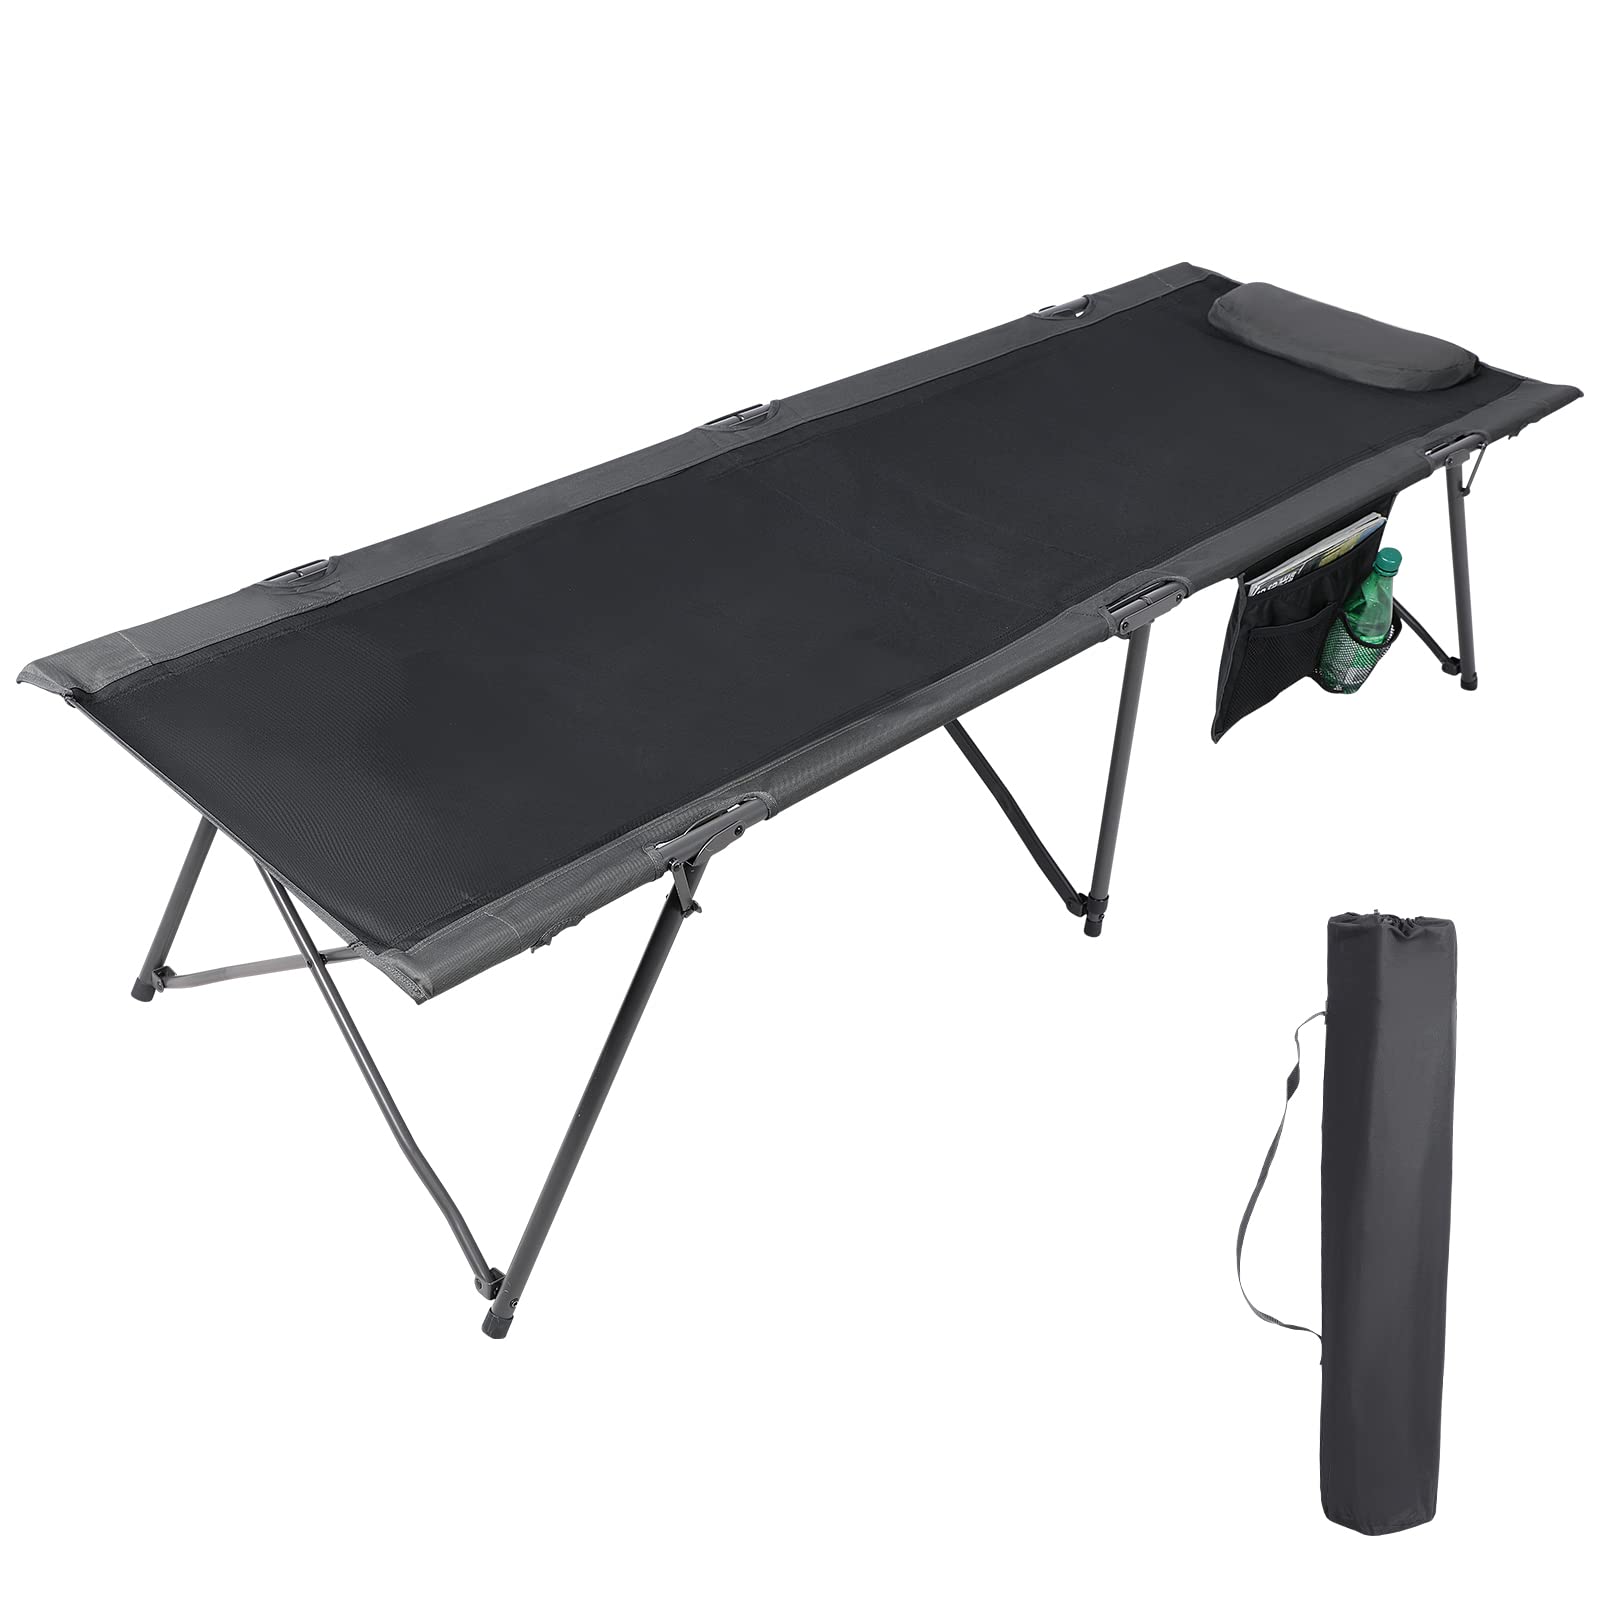 PORTAL Folding Camping Cot for Adults, 80” Extra Length Travel Cot with Pillow, Outdoor Sleeping Cots with Side Pockets, Easy to Set up Camping Cot with Carry Bag, Support 300LBS